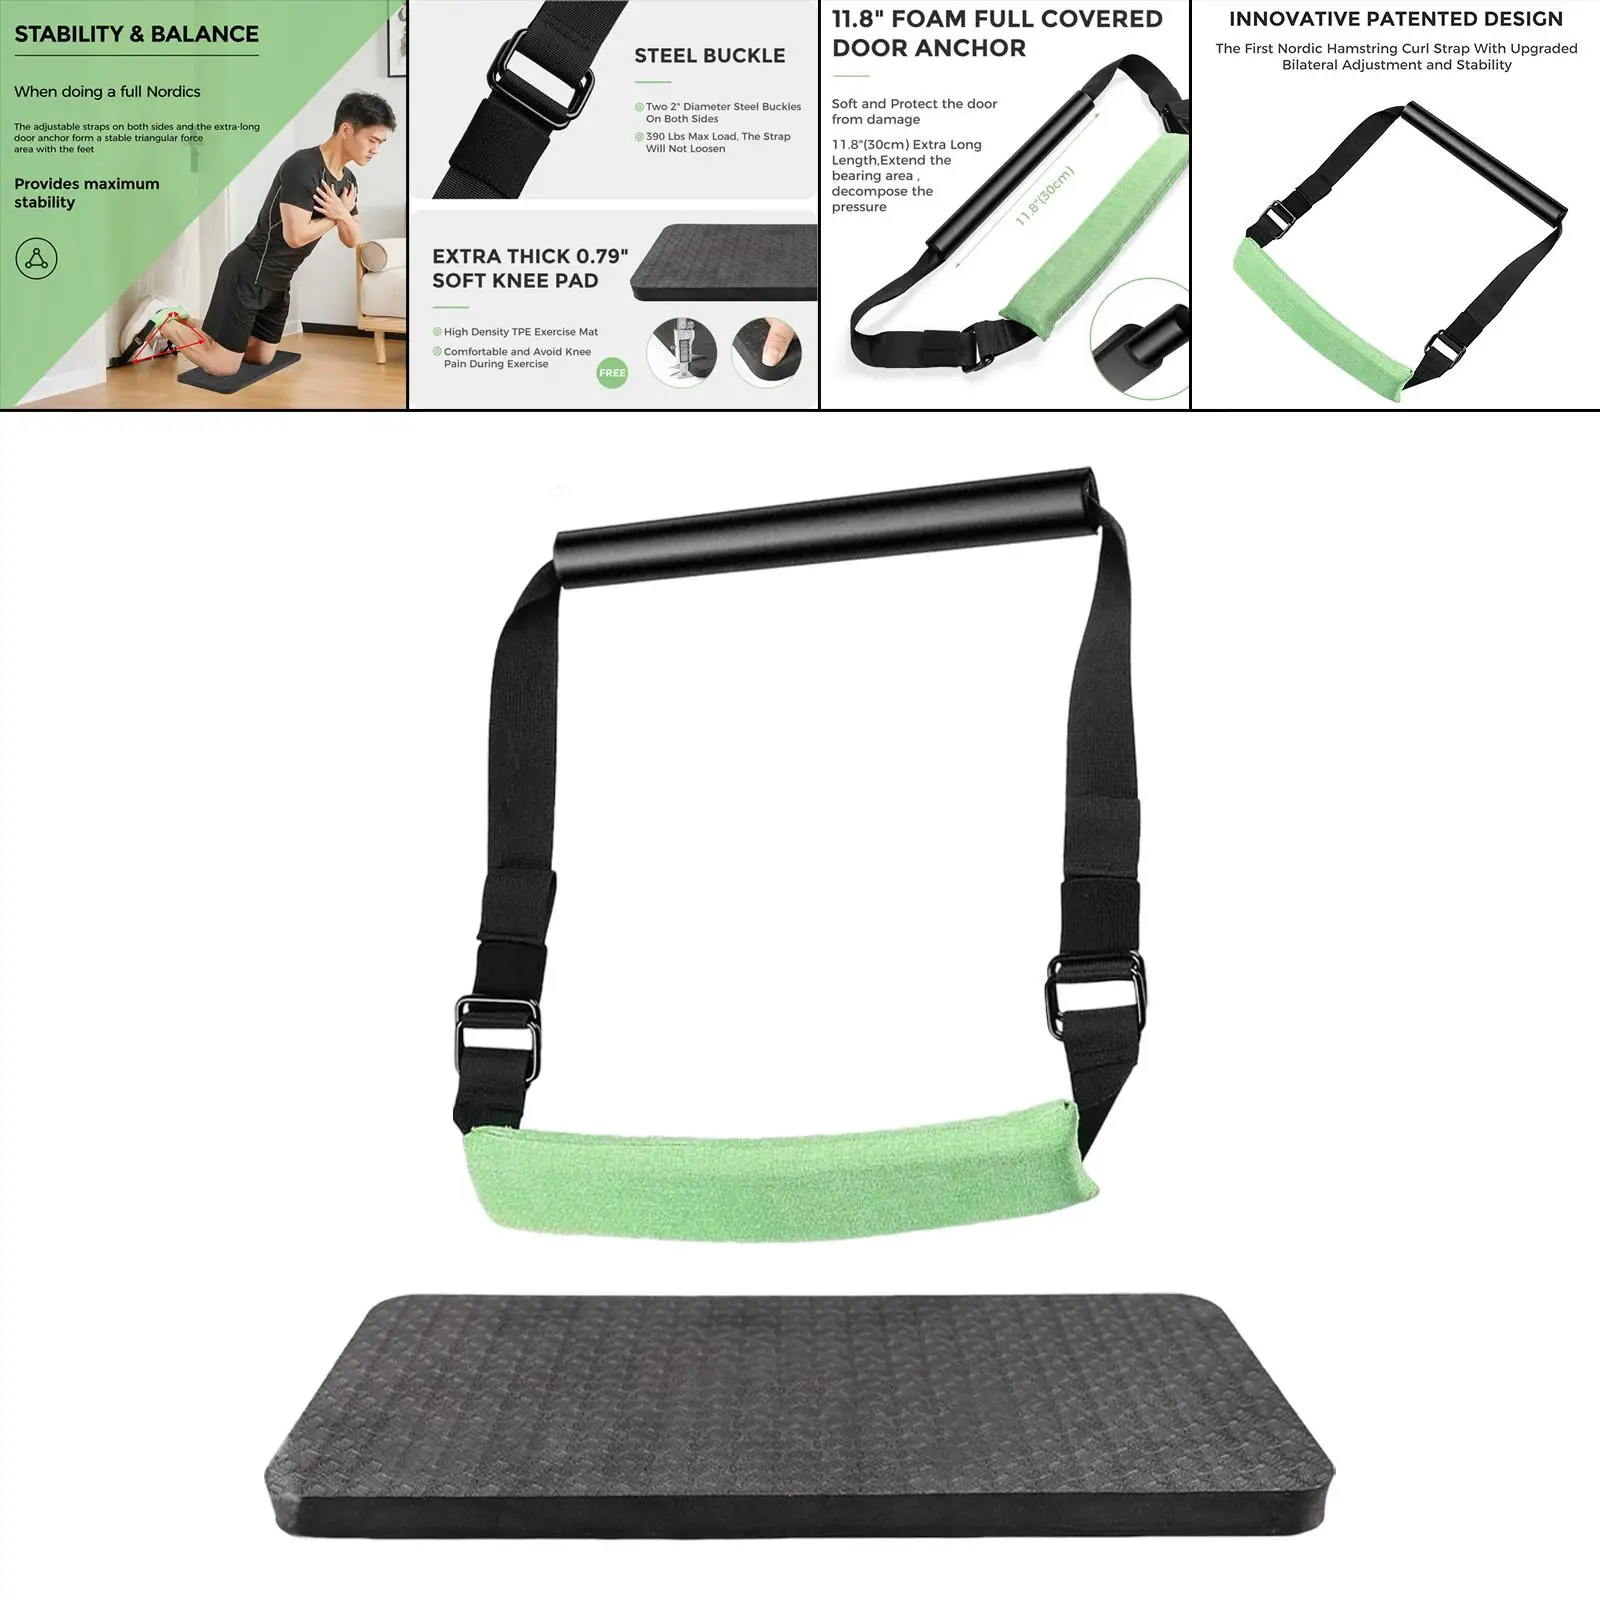 Hamstring Curl Strap Curl Ab Leg Exercise Crunches Adjustable Sit Up Assistant Bar for Home Workout Unisex Gym Fitness